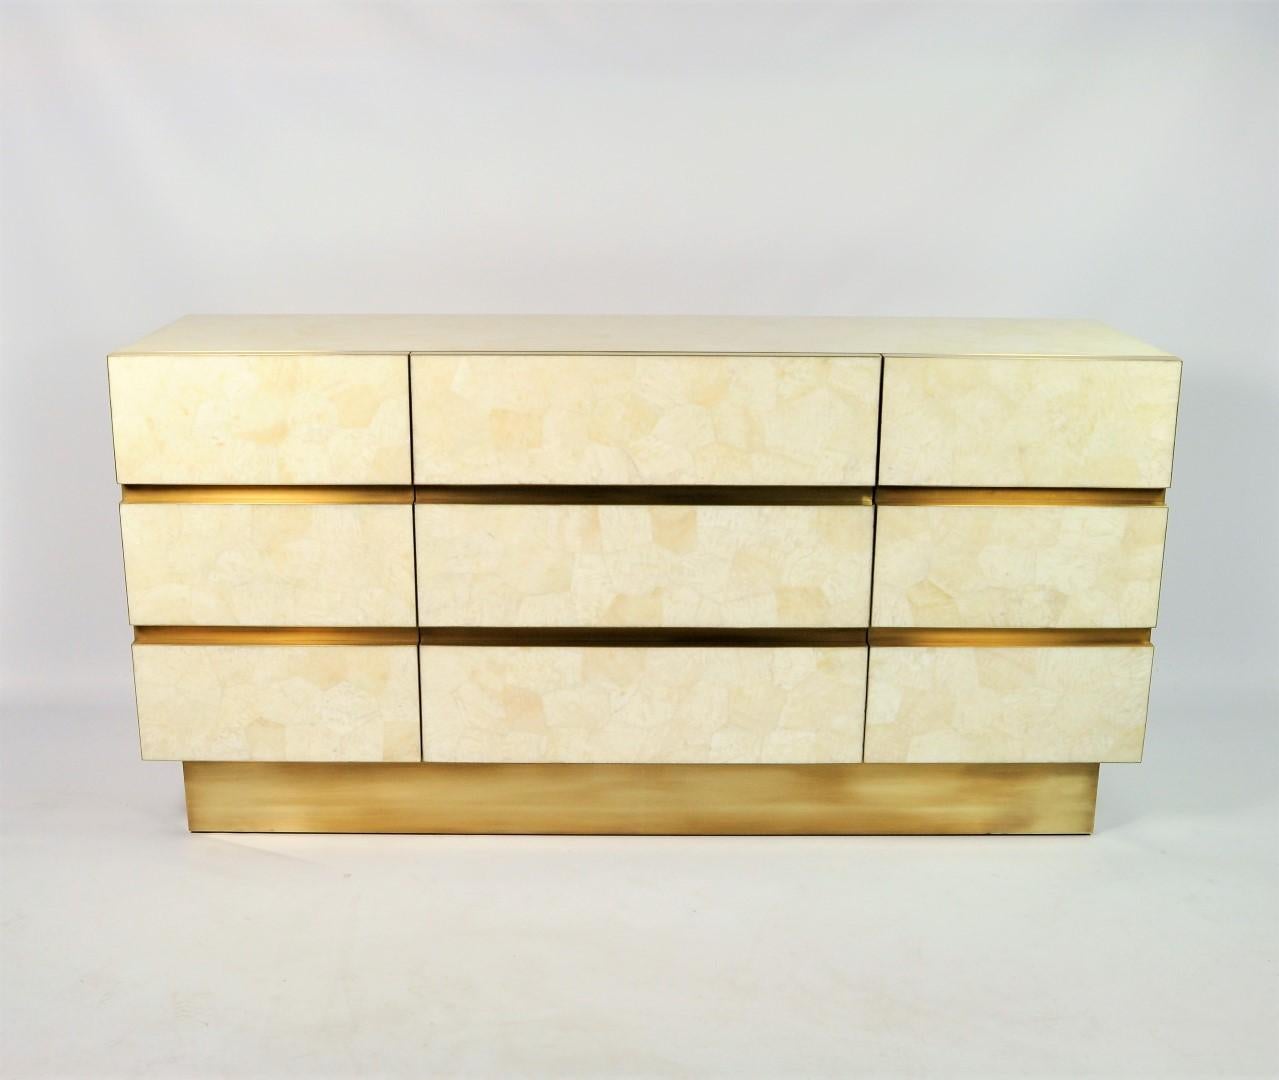 This cabinet has two doors and three drawers and it is made of white rock crystal marquetry with brass trims.
The base is in brushed brass.

The interior with shelves is in light wood veneer.
 
The dimensions of this piece are 63